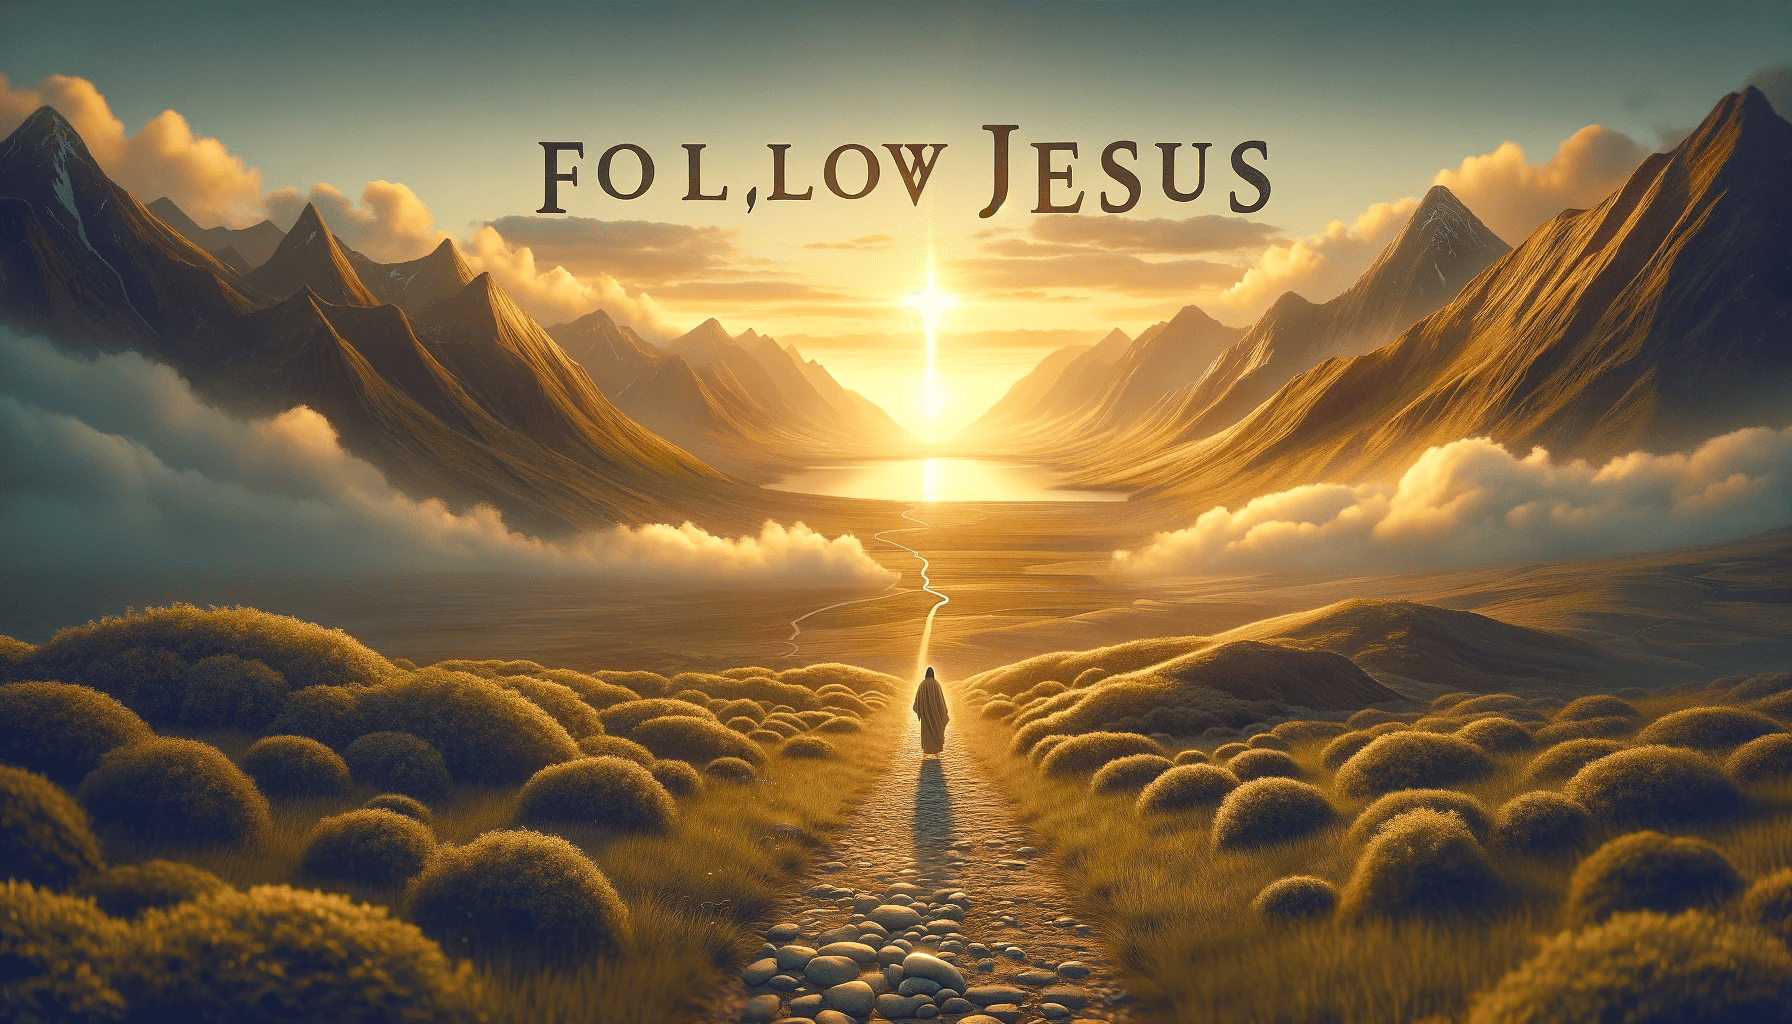 What Happens if You Follow Jesus?